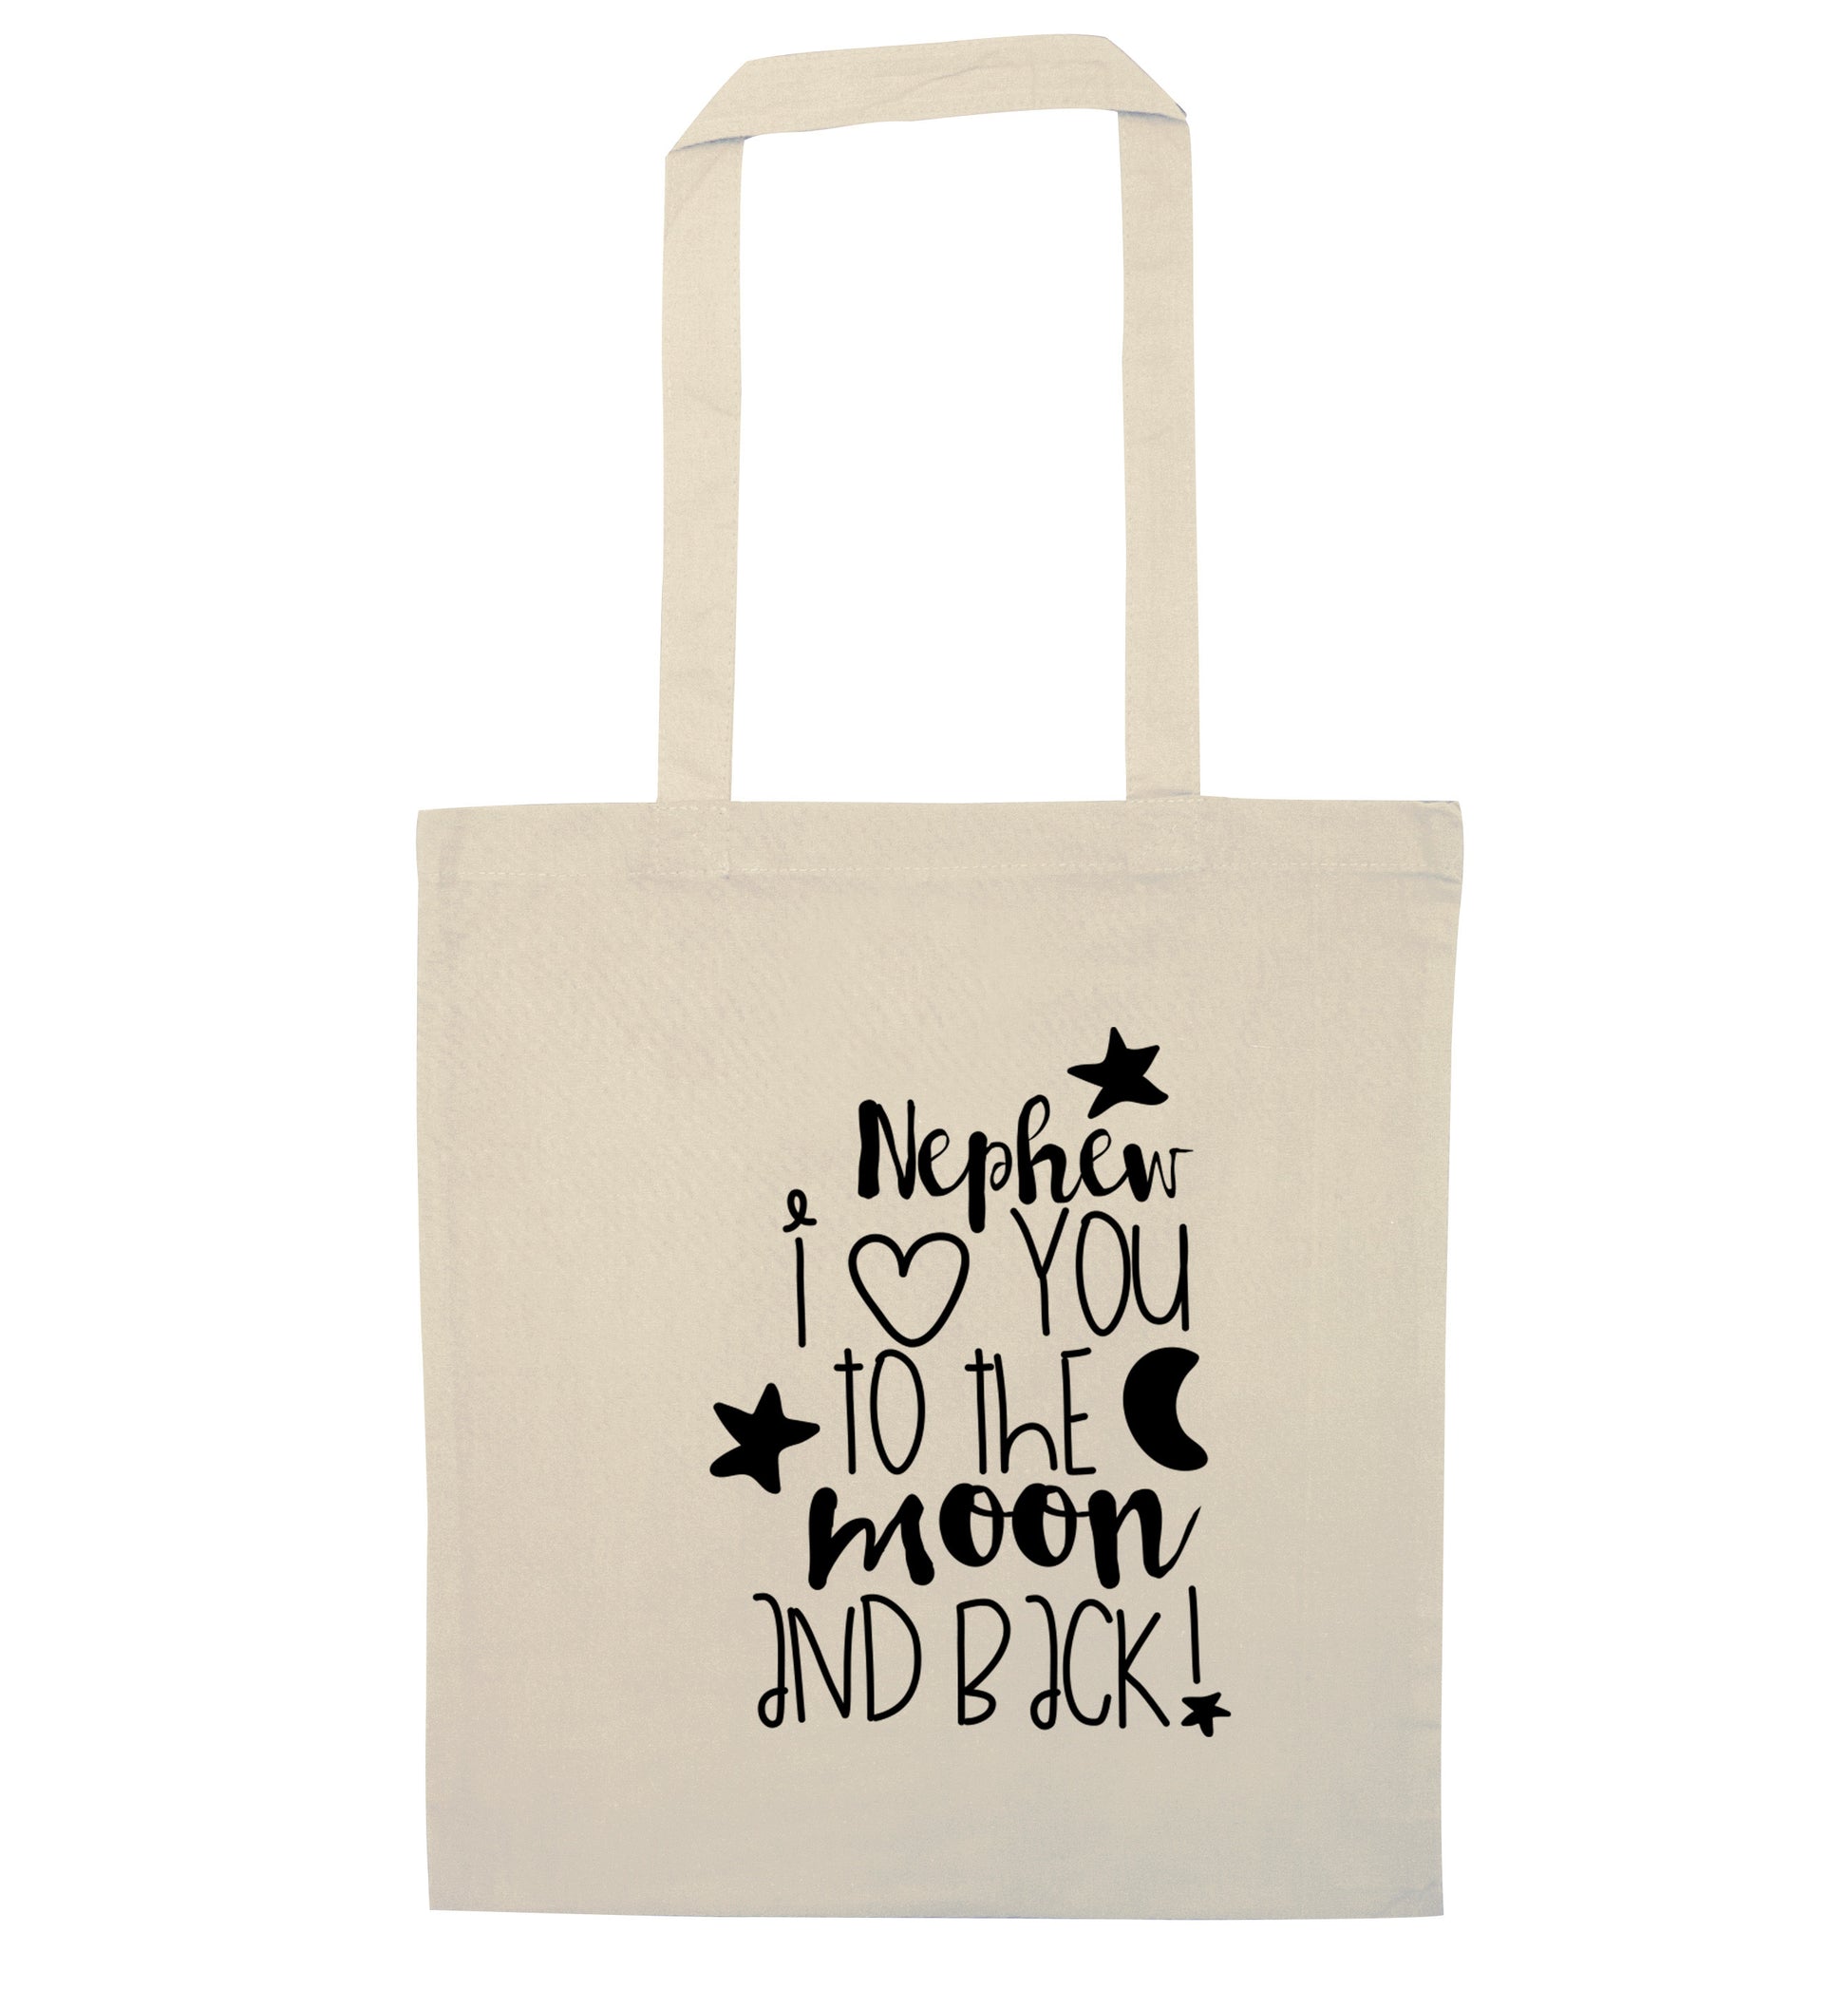 Nephew I love you to the moon and back natural tote bag